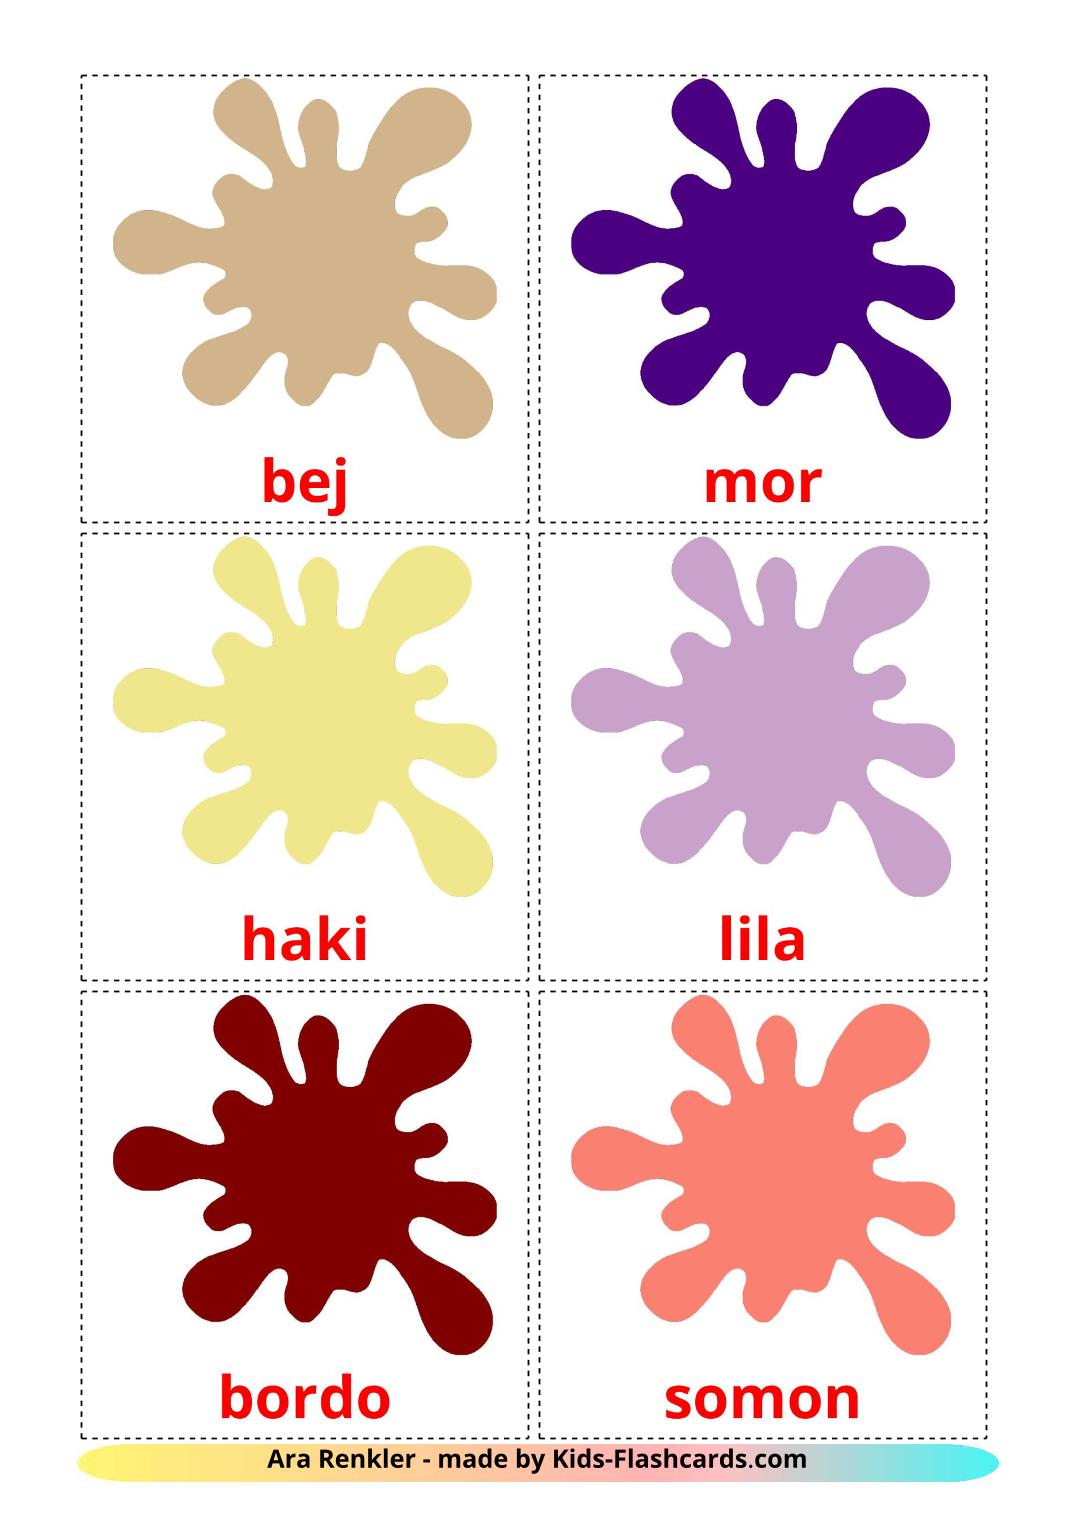 Secondary colors - 20 Free Printable turkish Flashcards 